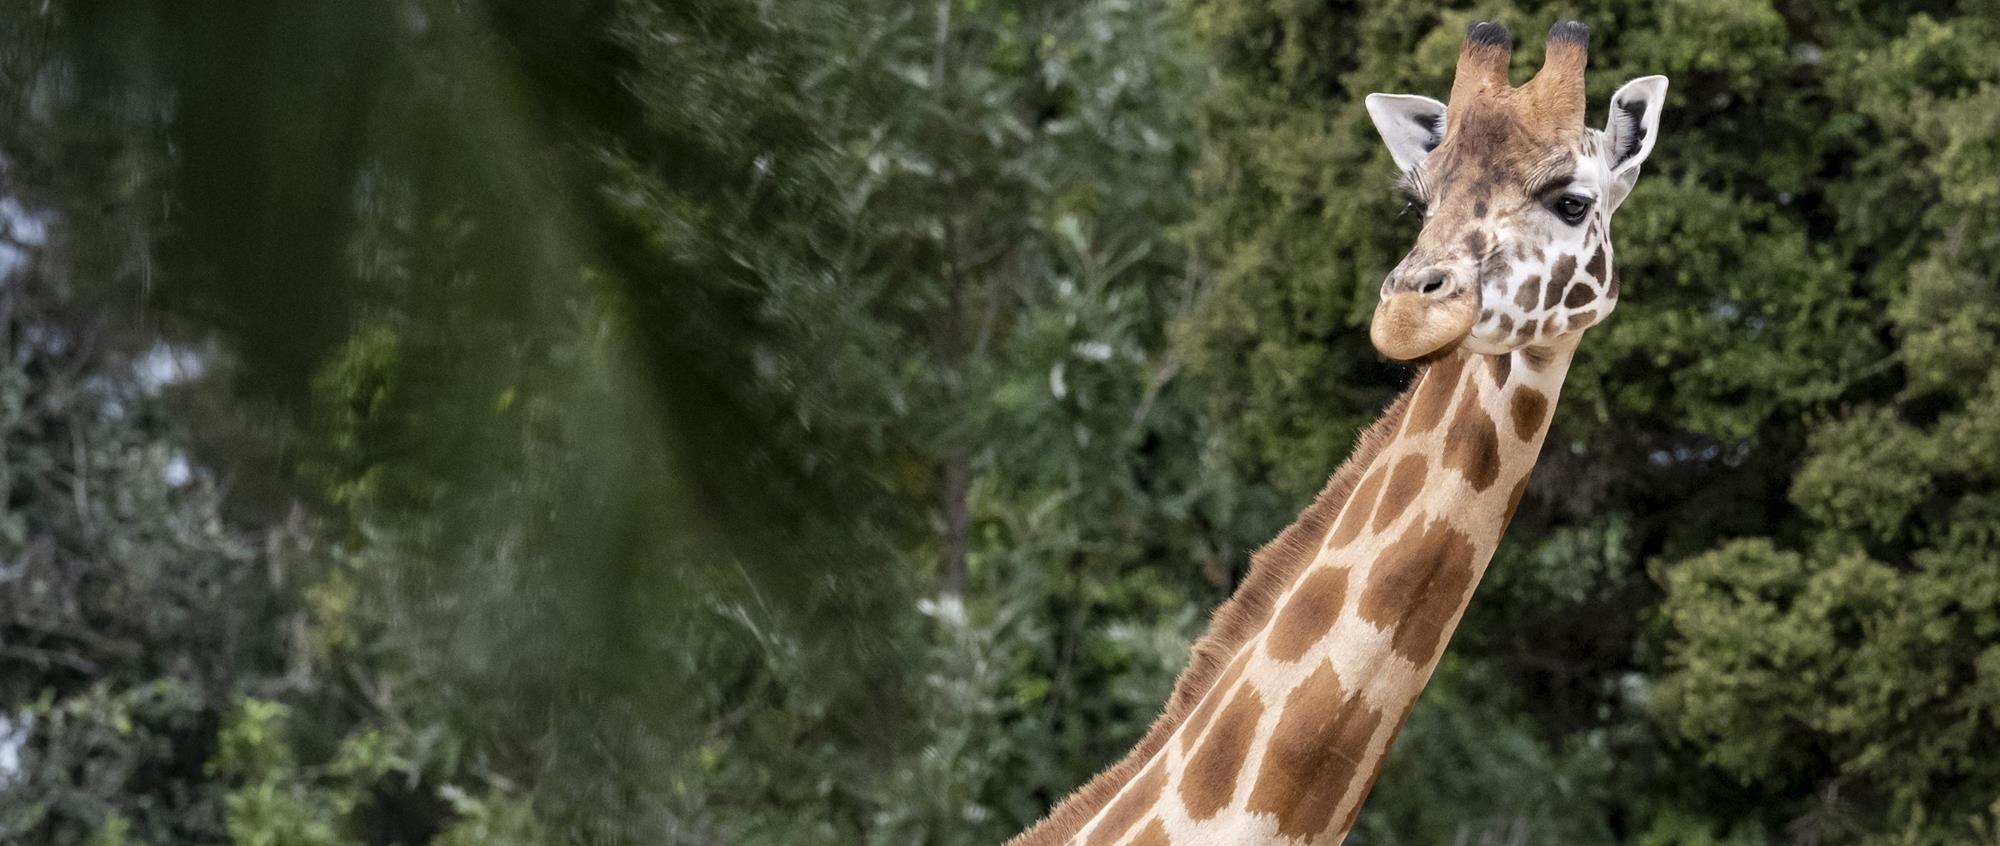 A Giraffe, shown from the neck up and looking right, against a backdrop of trees and with a branch in the foreground.